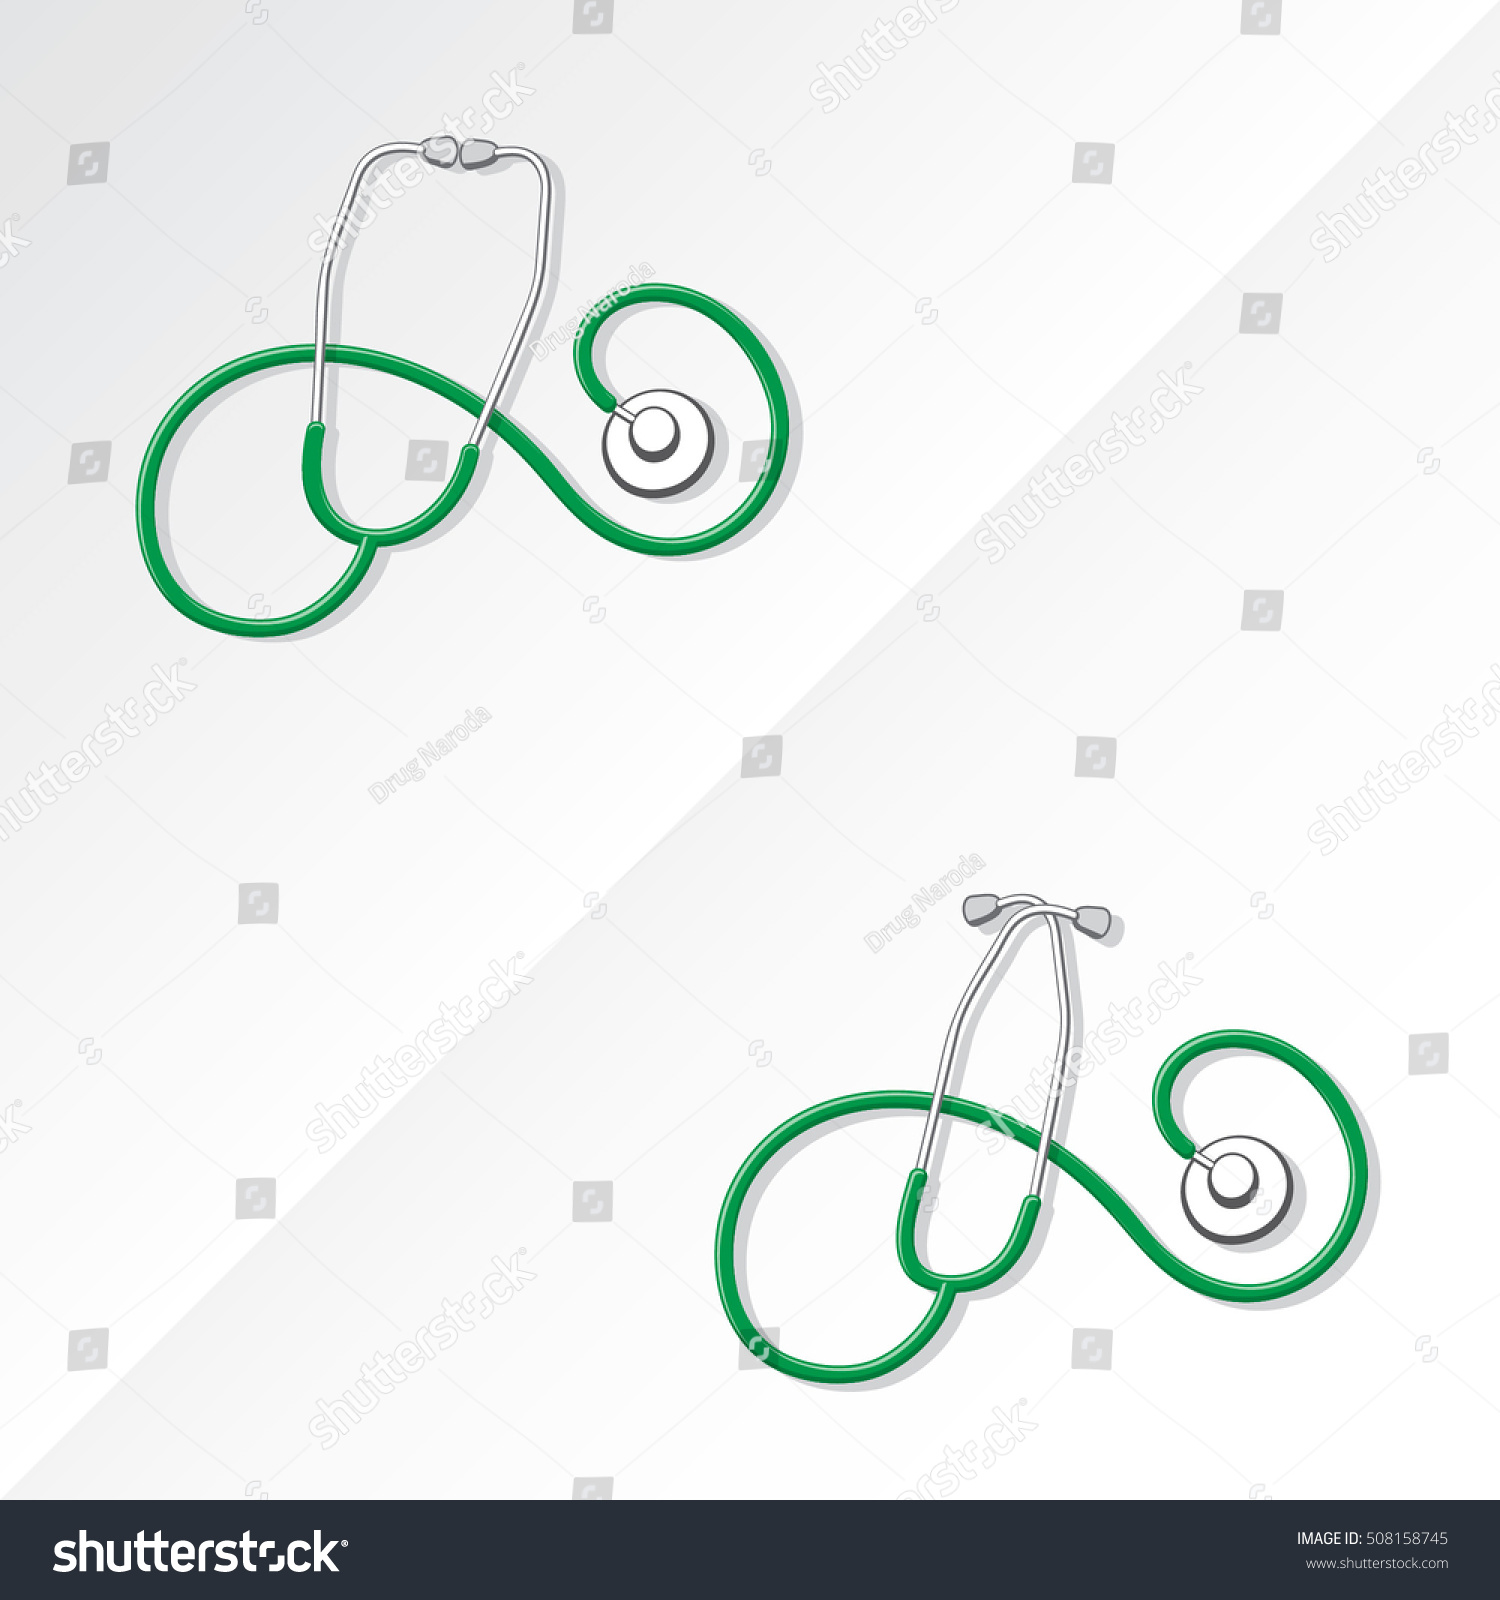 SVG of Two Medical Stethoscopes with Spiral Shape Tubing Icons Set One with Crossed Binaural Another with Eartips Put Together - Grayscale and Green Objects on White Background - Realistic Flat Design svg